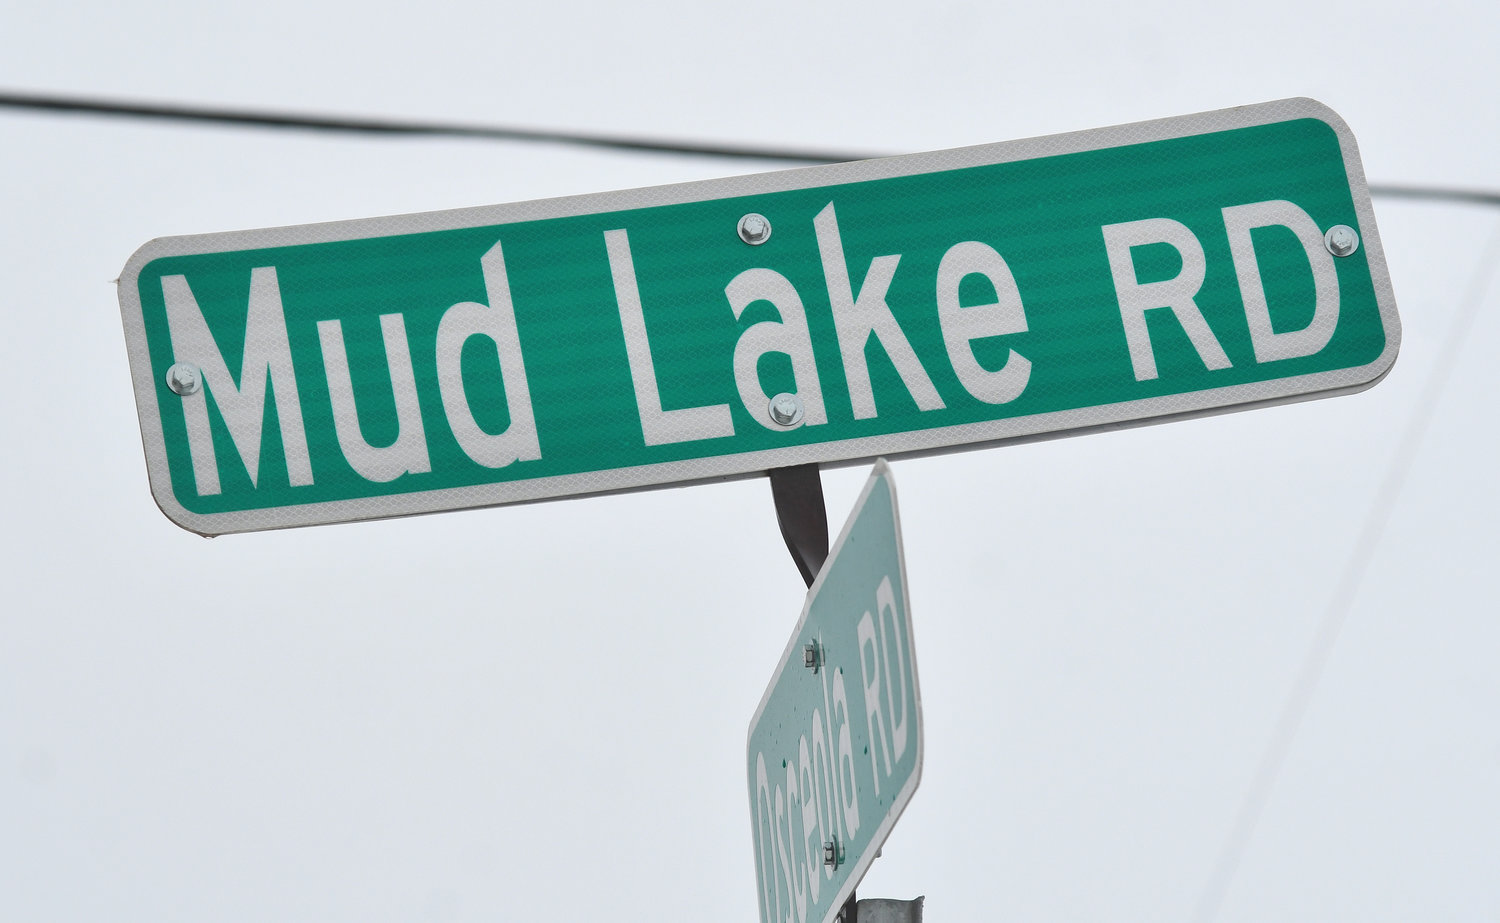 RURAL ROAD — The street sign for Mud Lake Road in West Leyden.